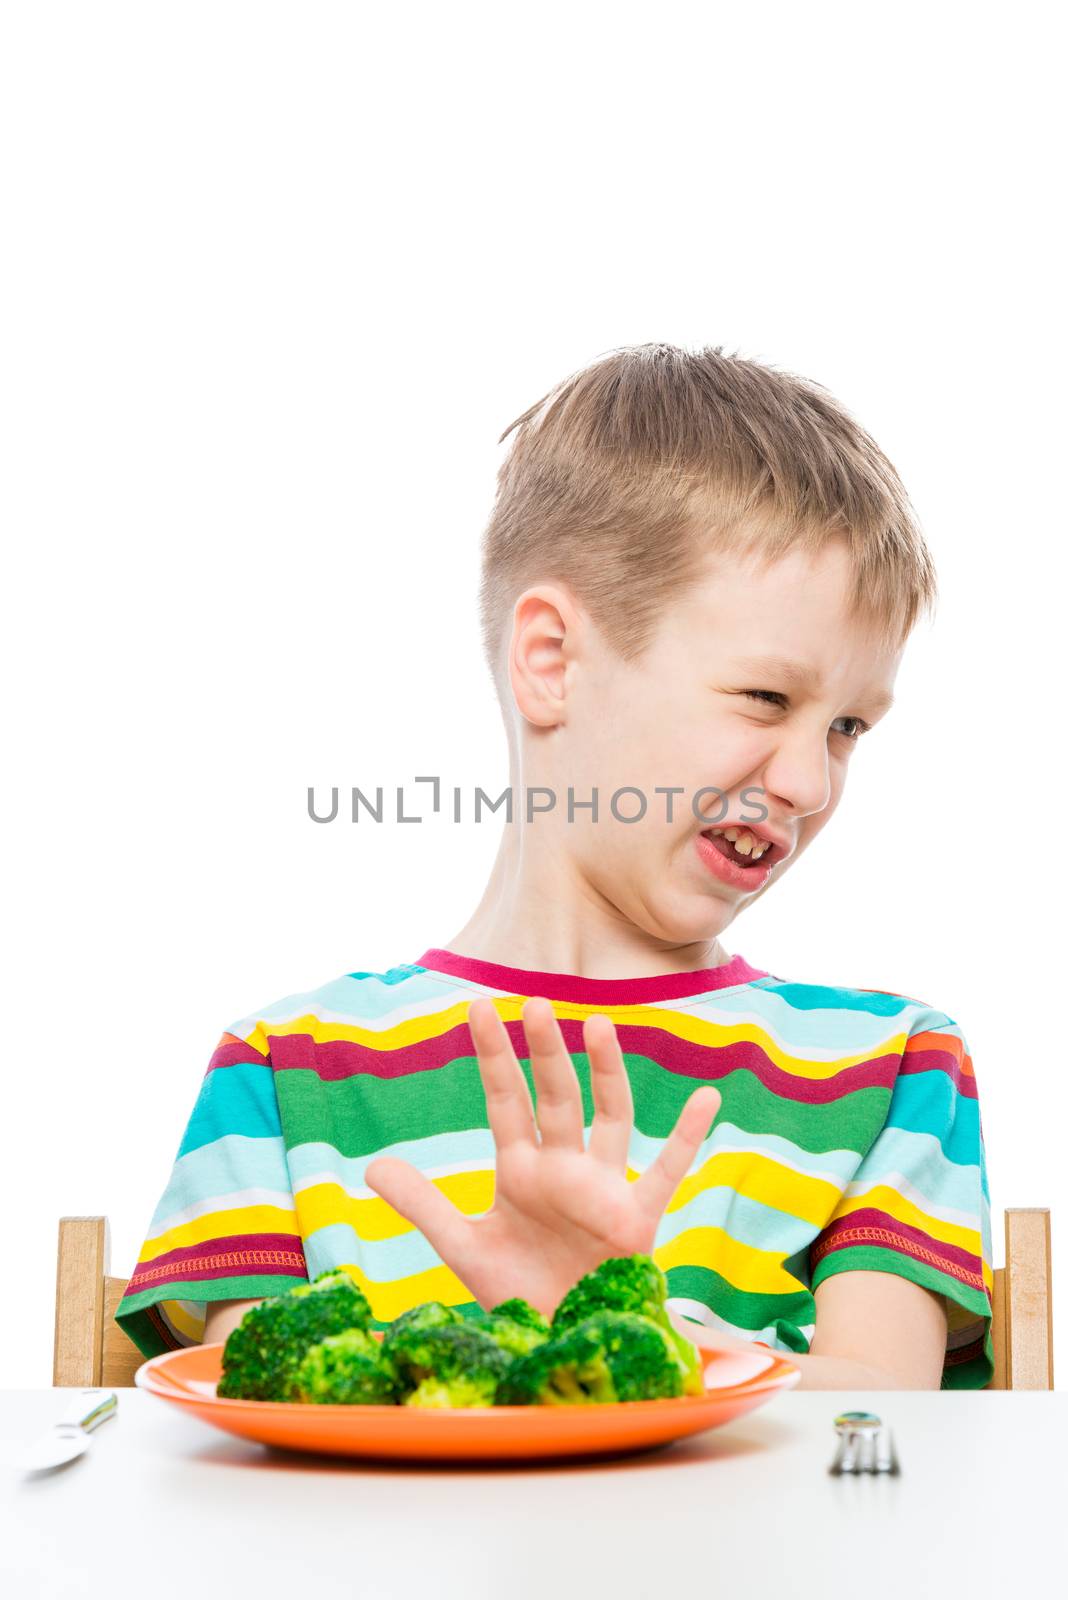 10-year-old boy refuses a plate of broccoli for lunch, concept p by kosmsos111